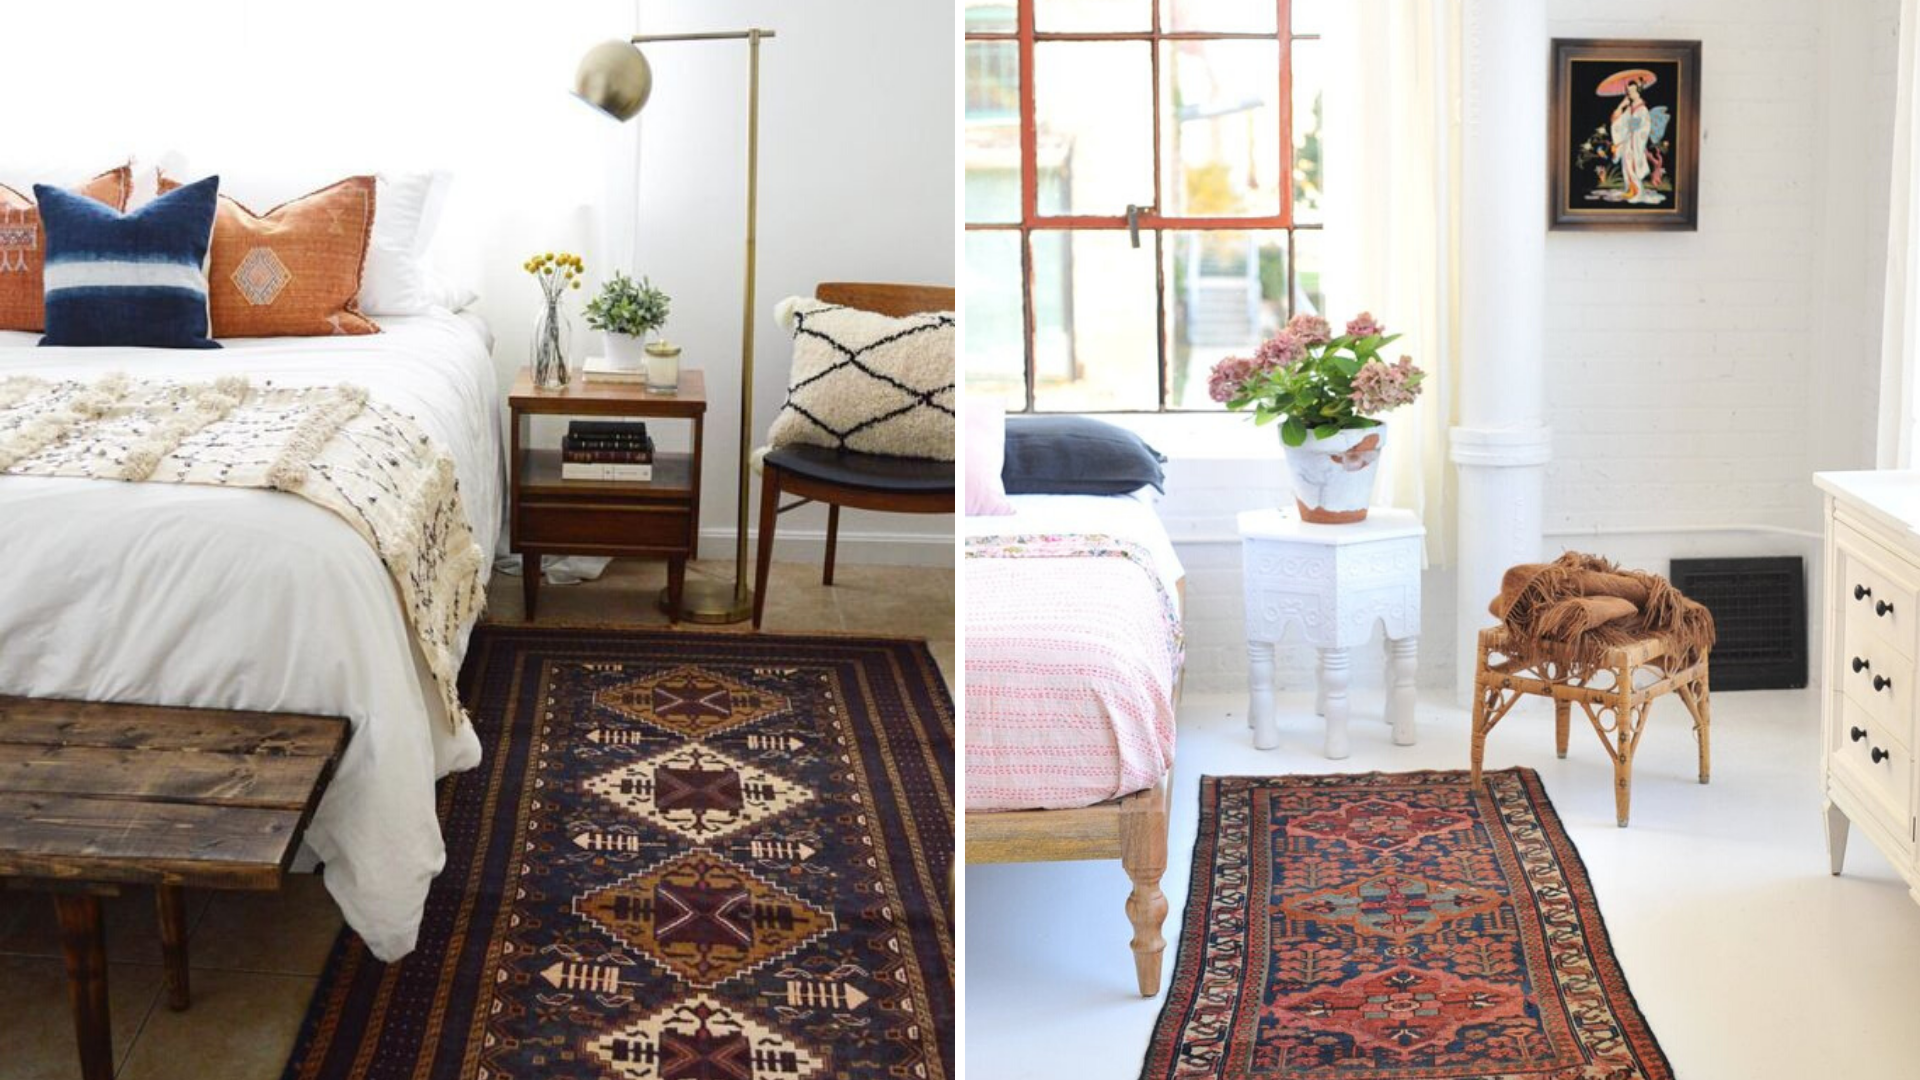 persian rugs, oriental rugs, persian rug runners, runners, runner rugs, london rugs, uk rugs, rug collections, interior design, design ideas, rug placement, home accessories